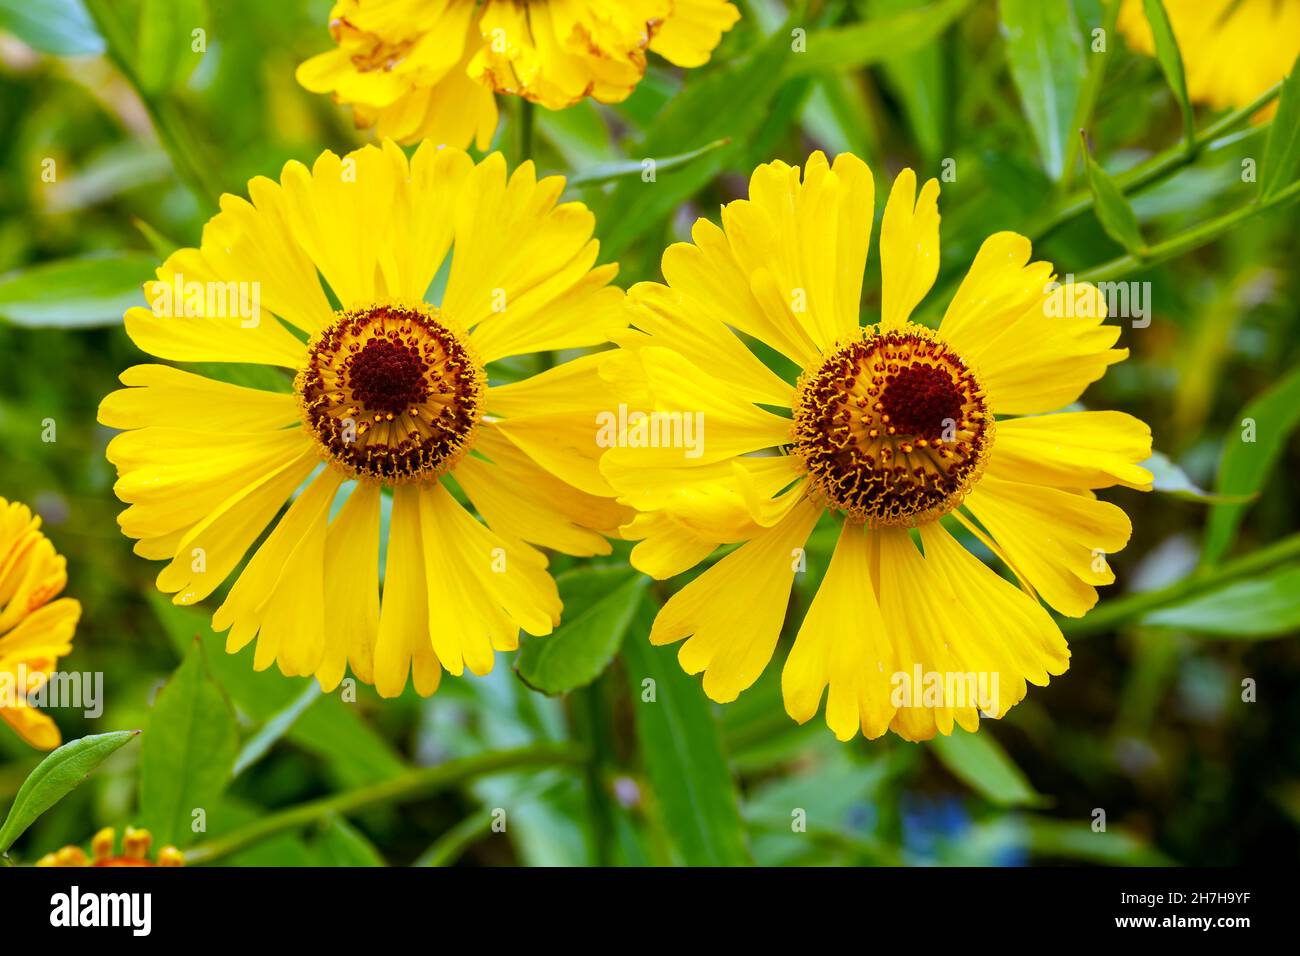 Helenium 'Blutentisch' a late summer autumn flowering plant with a yellow fall flower commonly known as sneezeweed, stock photo image Stock Photo